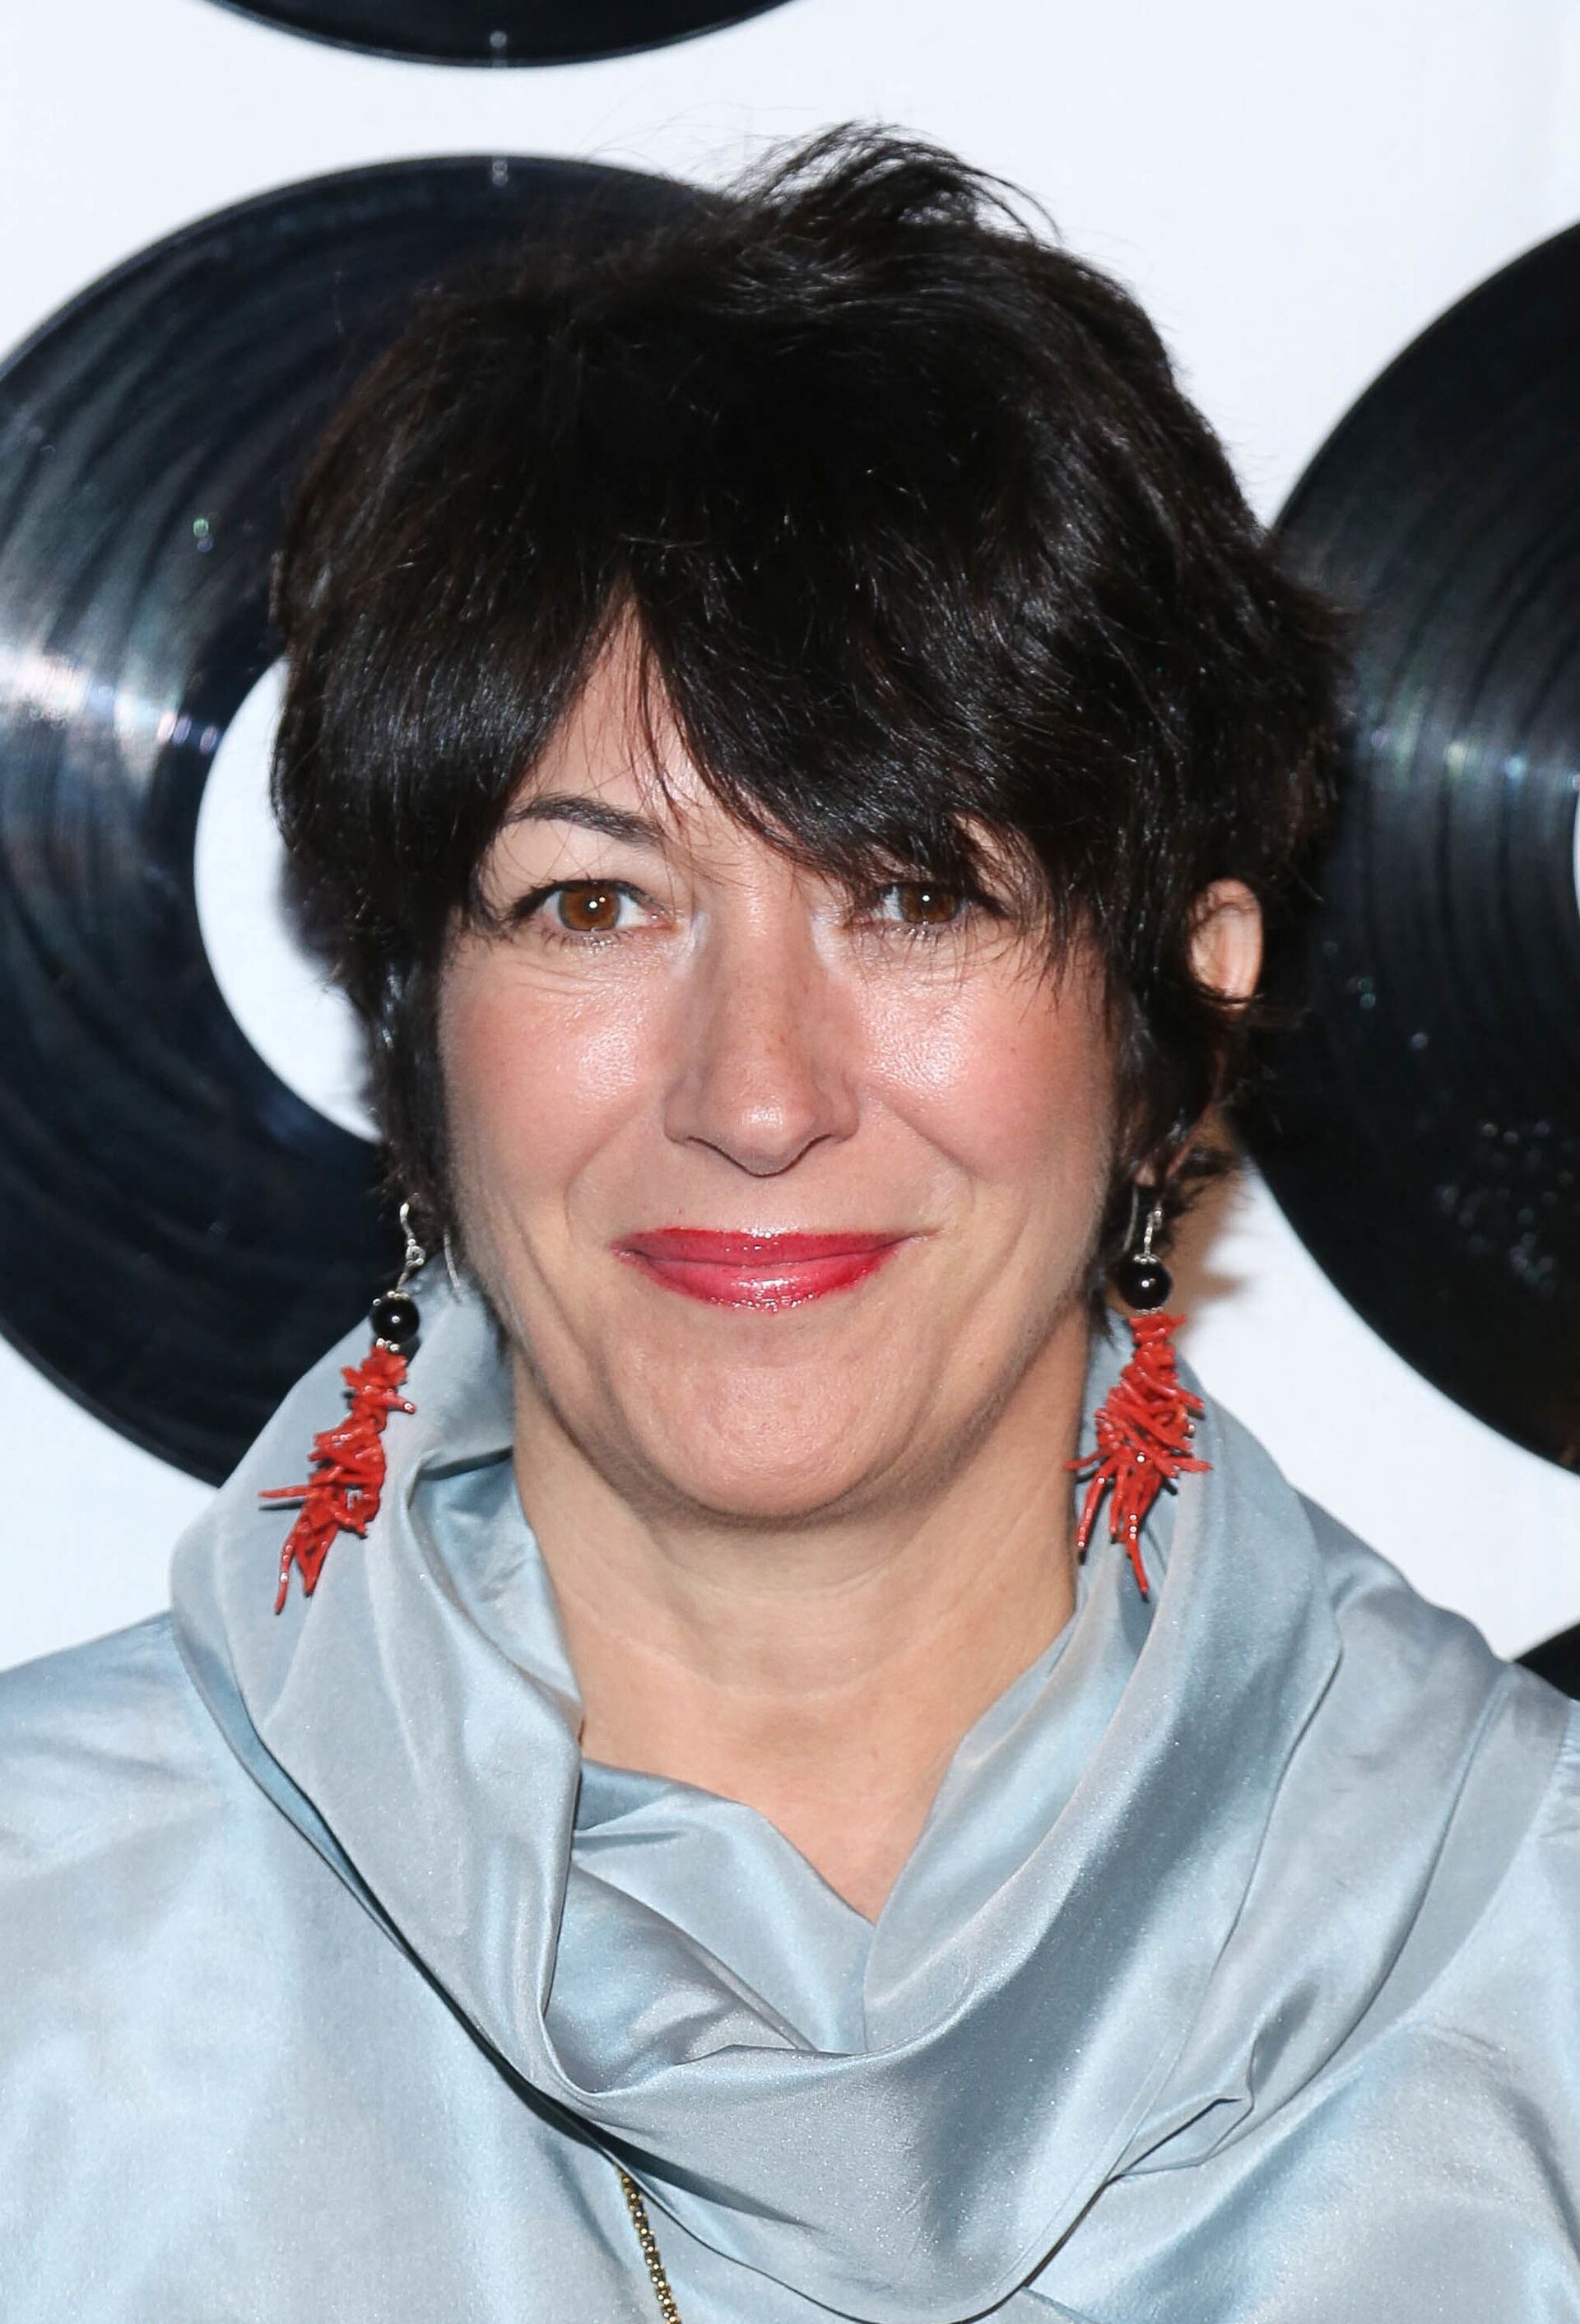 NEW YORK, NY - MAY 06: Ghislaine Maxwell attends the 2014 ETM (EDUCATION THROUGH MUSIC) Children's Benefit Gala at Capitale on May 6, 2014 in New York City - Sputnik International, 1920, 17.12.2021